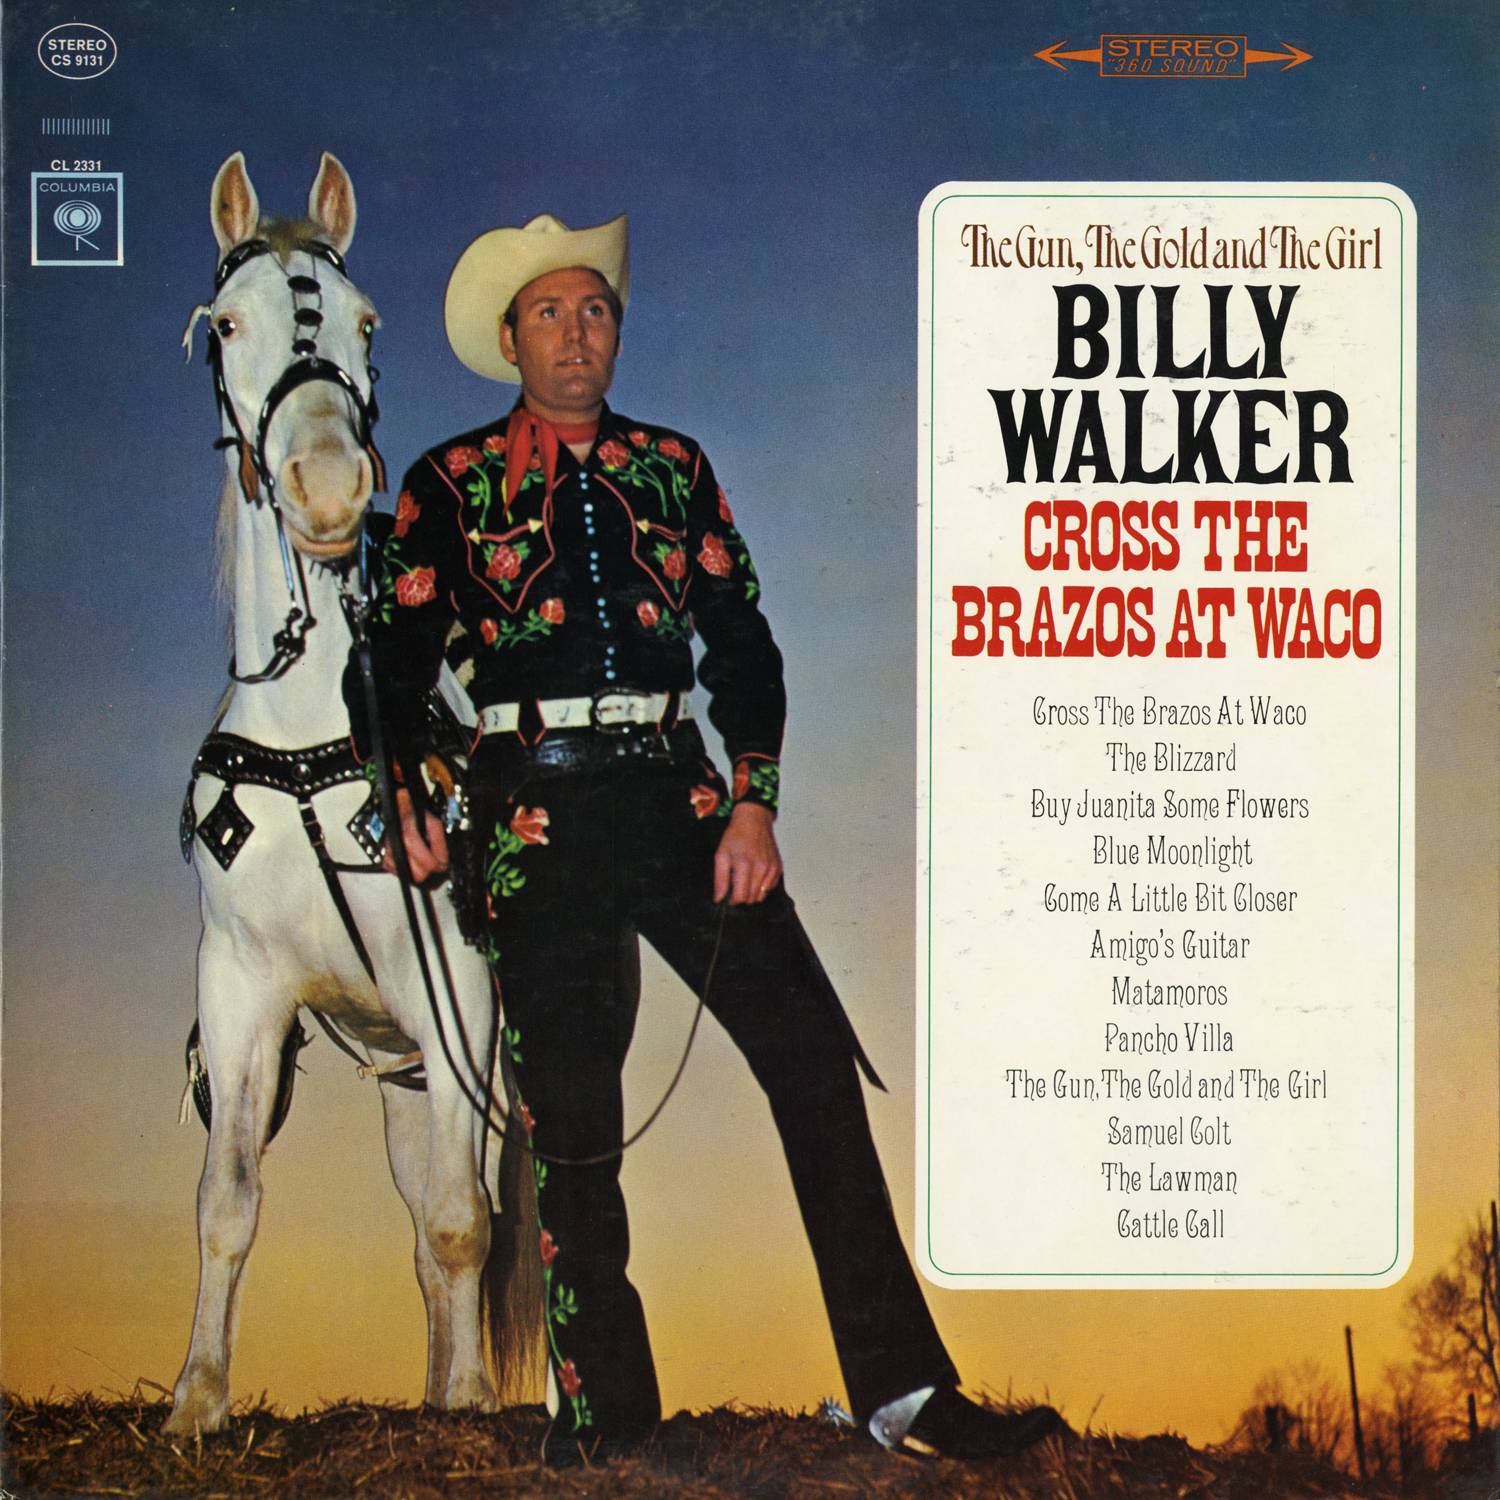 Billy Walker – The Gun, The Gold And The Girl (1965/2015) [AcousticSounds FLAC 24bit/96kHz]